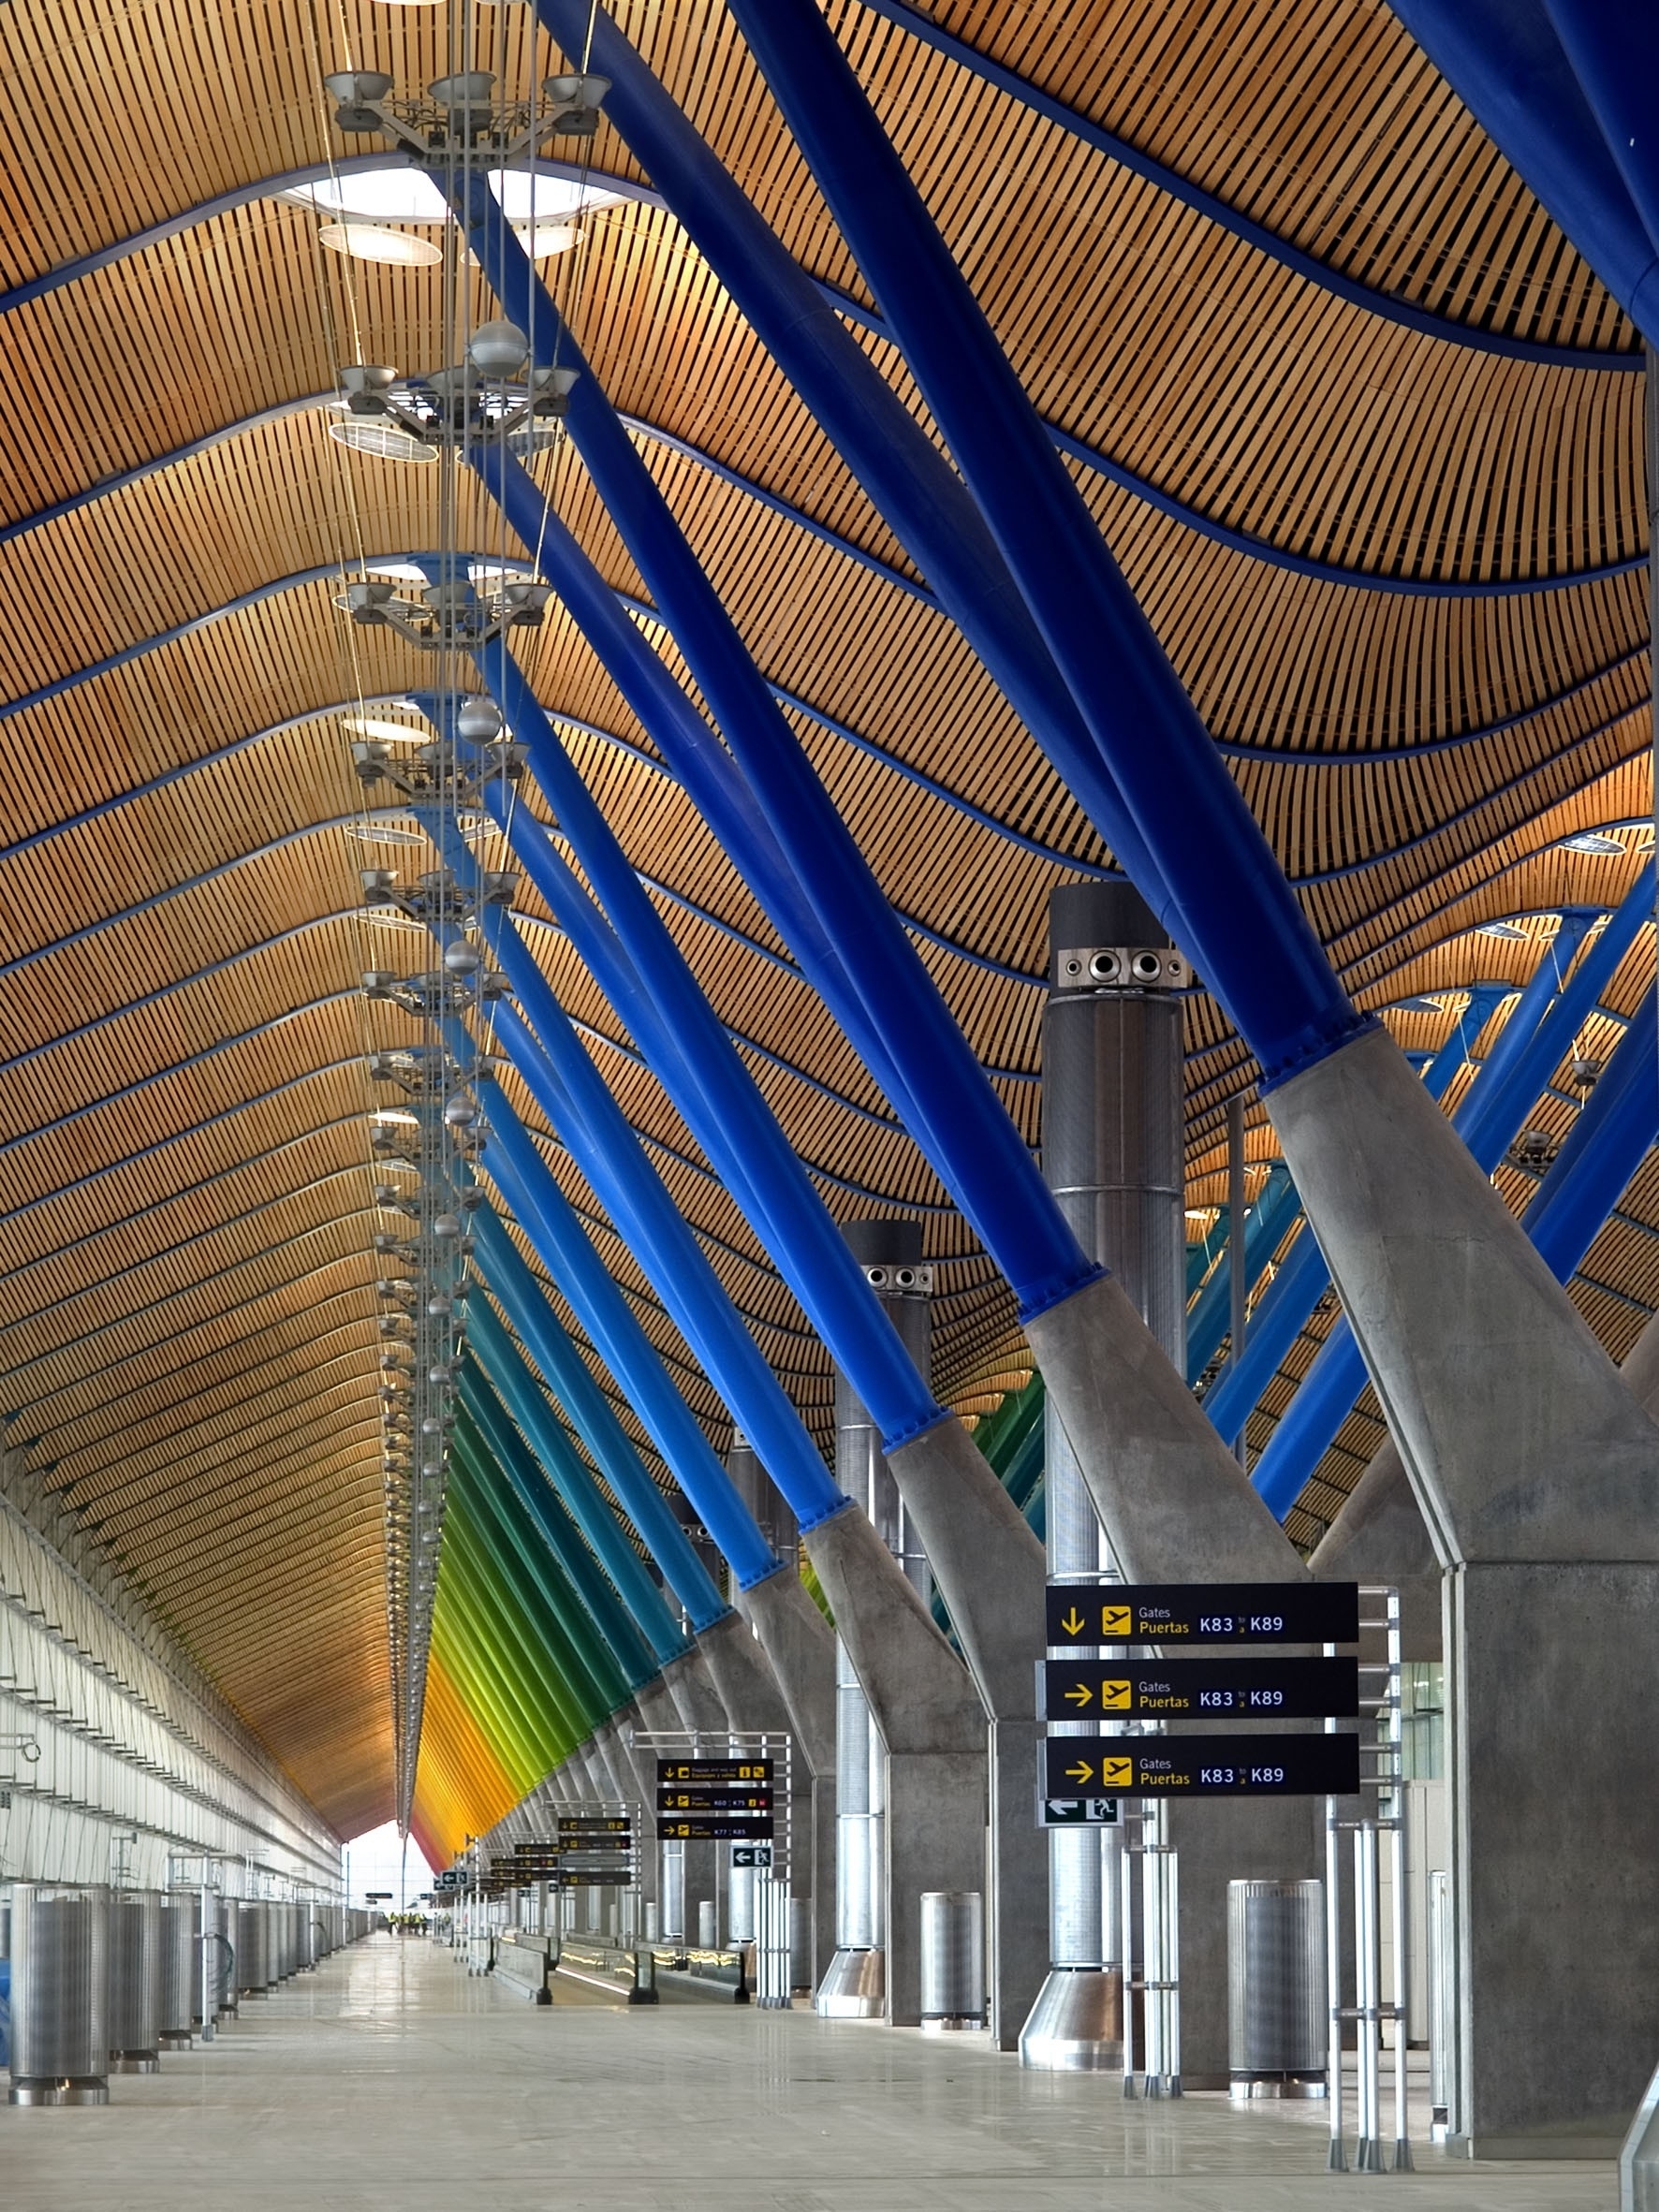 Madrid T4, one of the most emblematic airport works by FCC